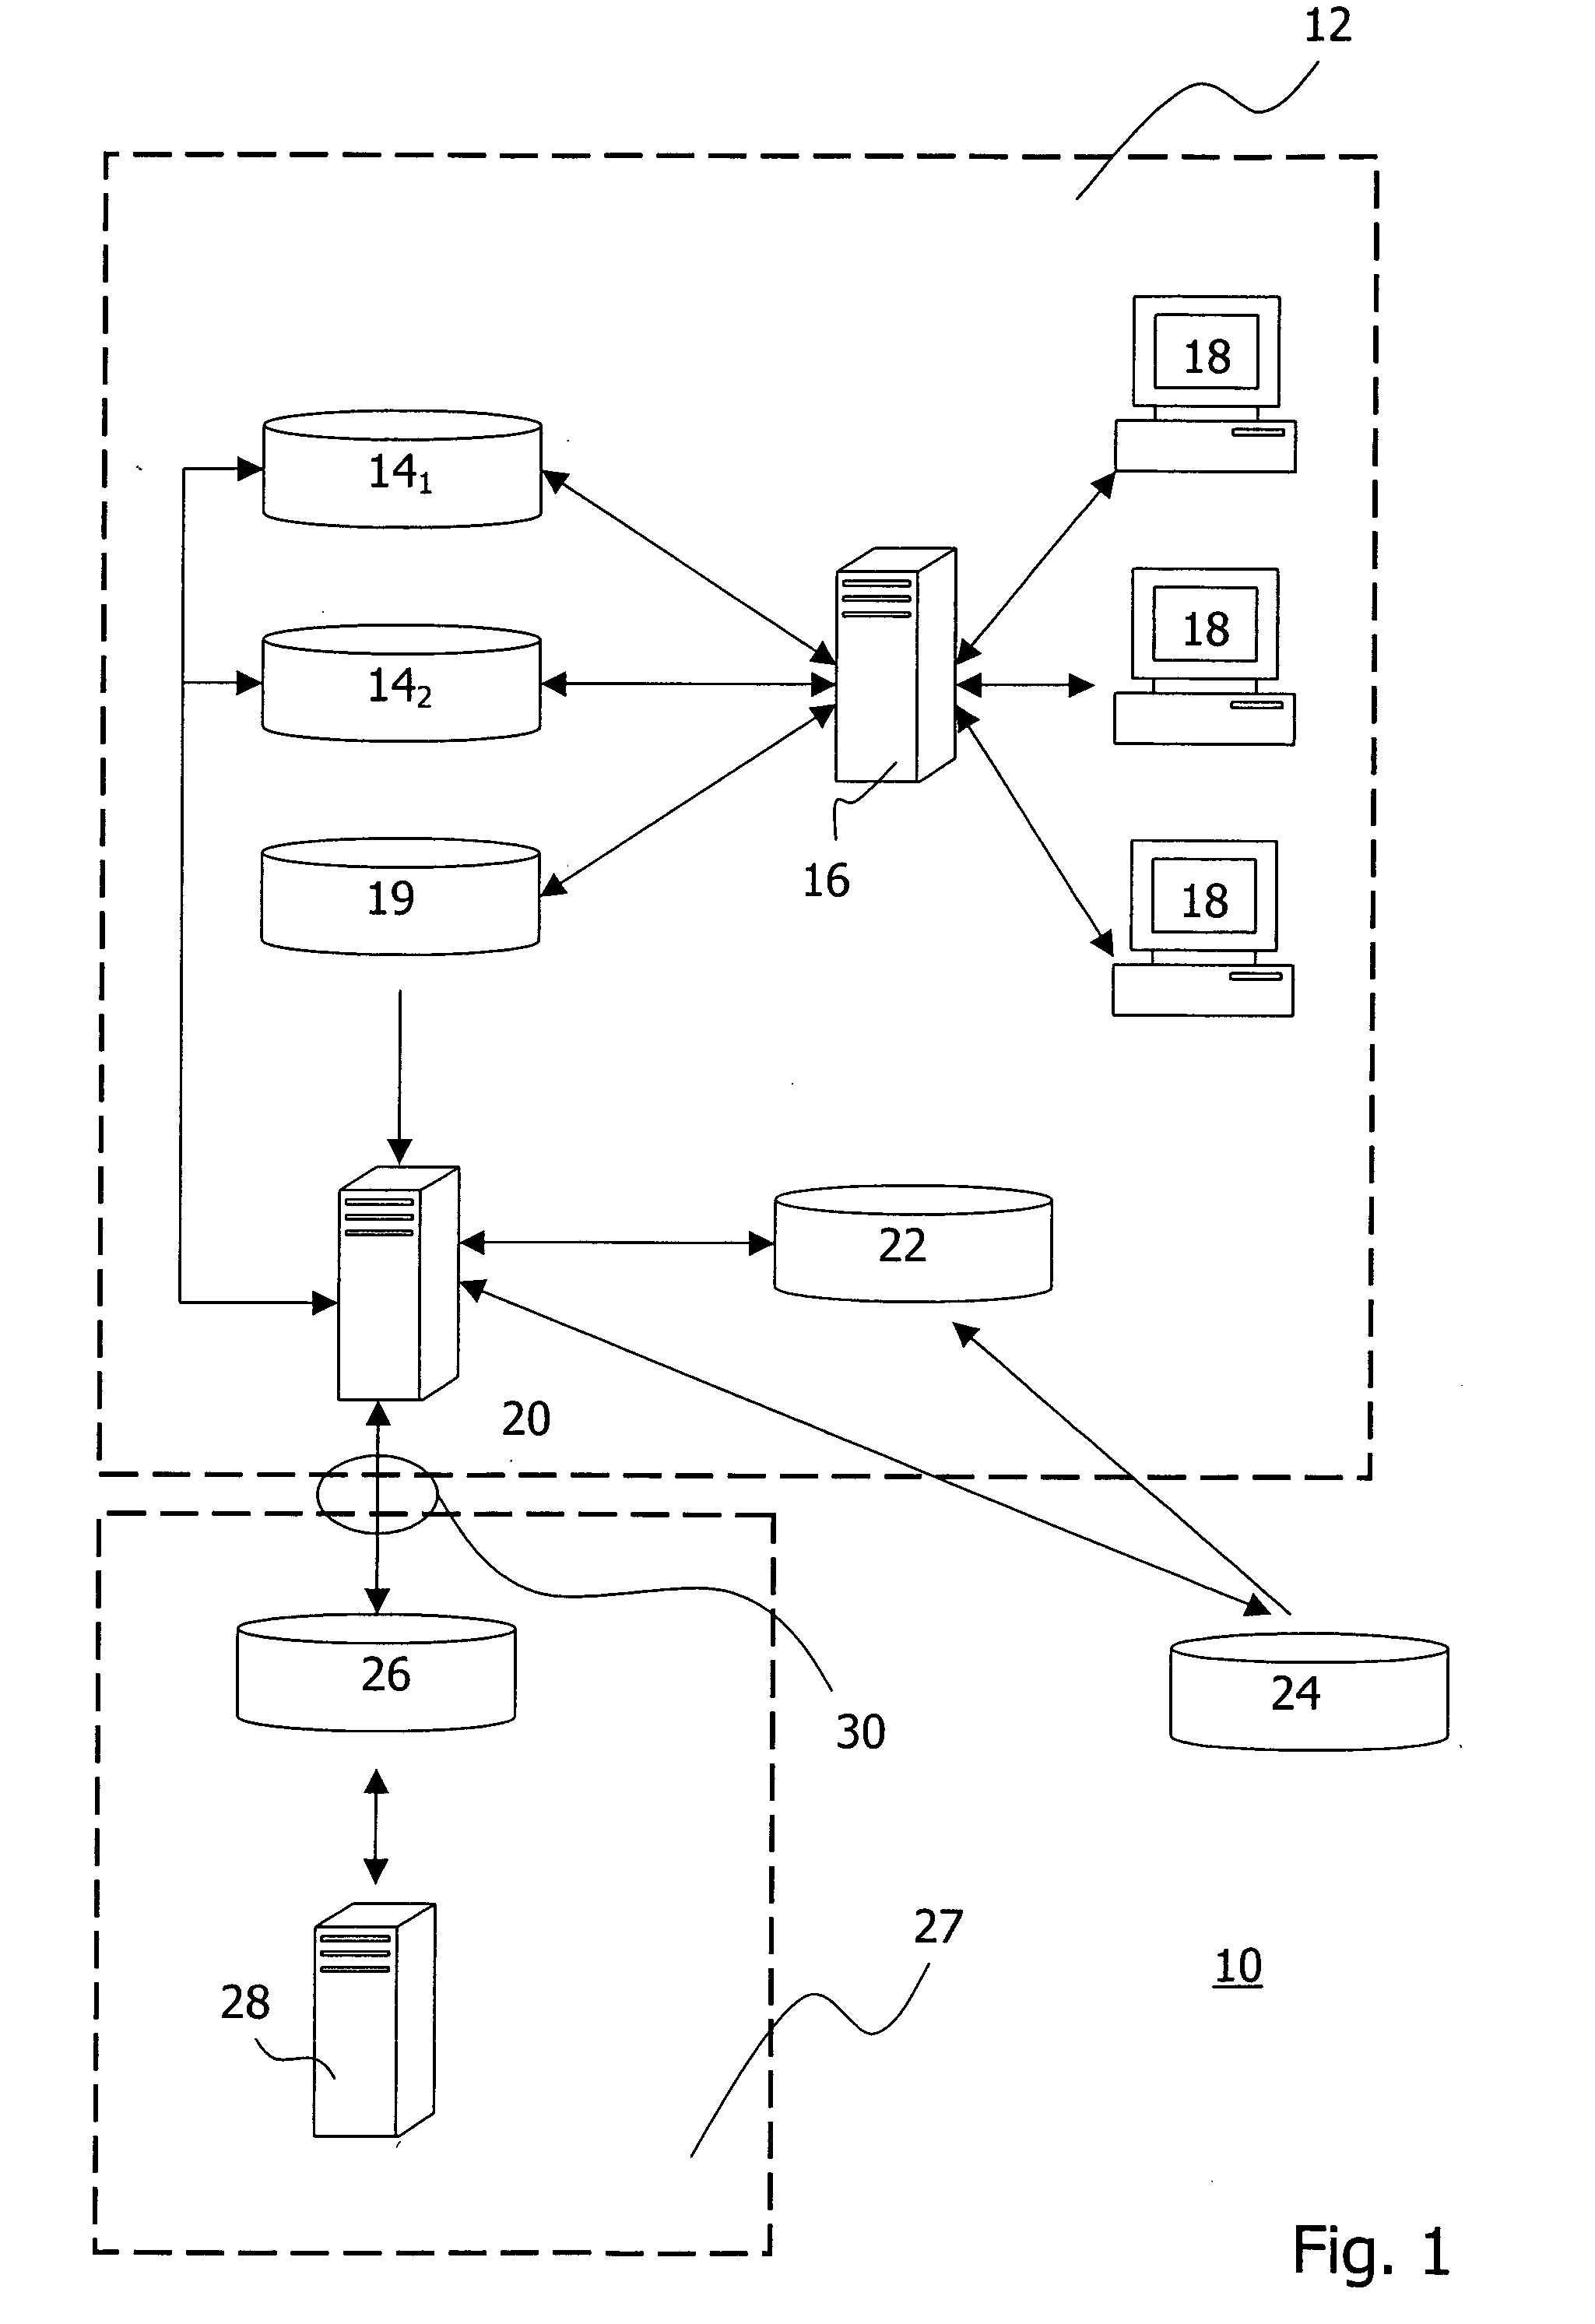 Generation of updatable anonymized data records for testing and developing purposes